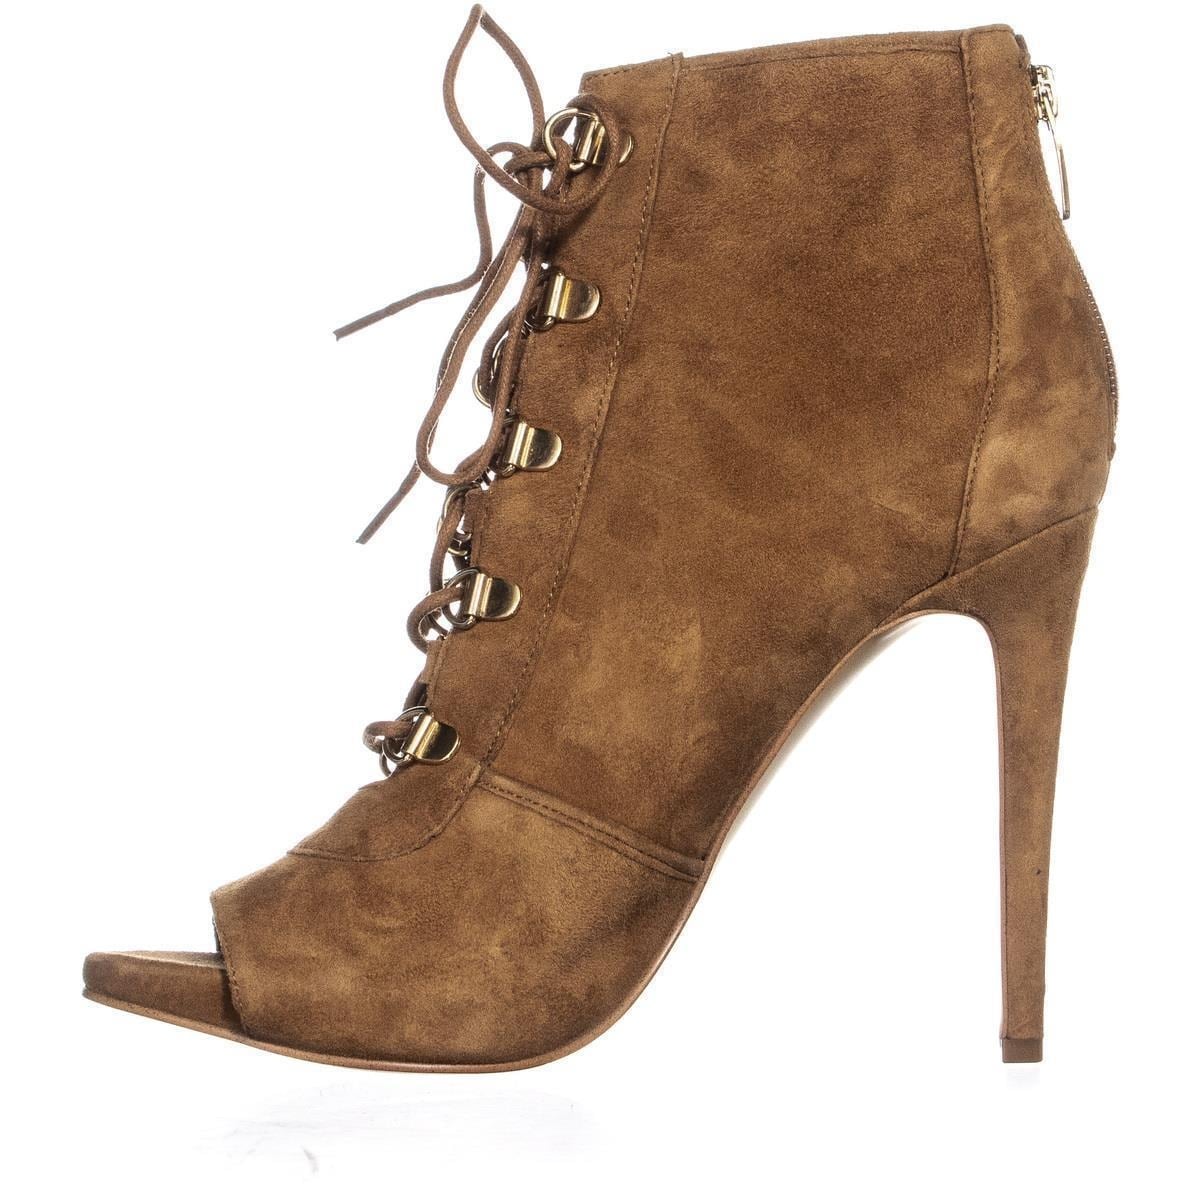 GUESS Alysa Lace Up Ankle Boots, Medium 